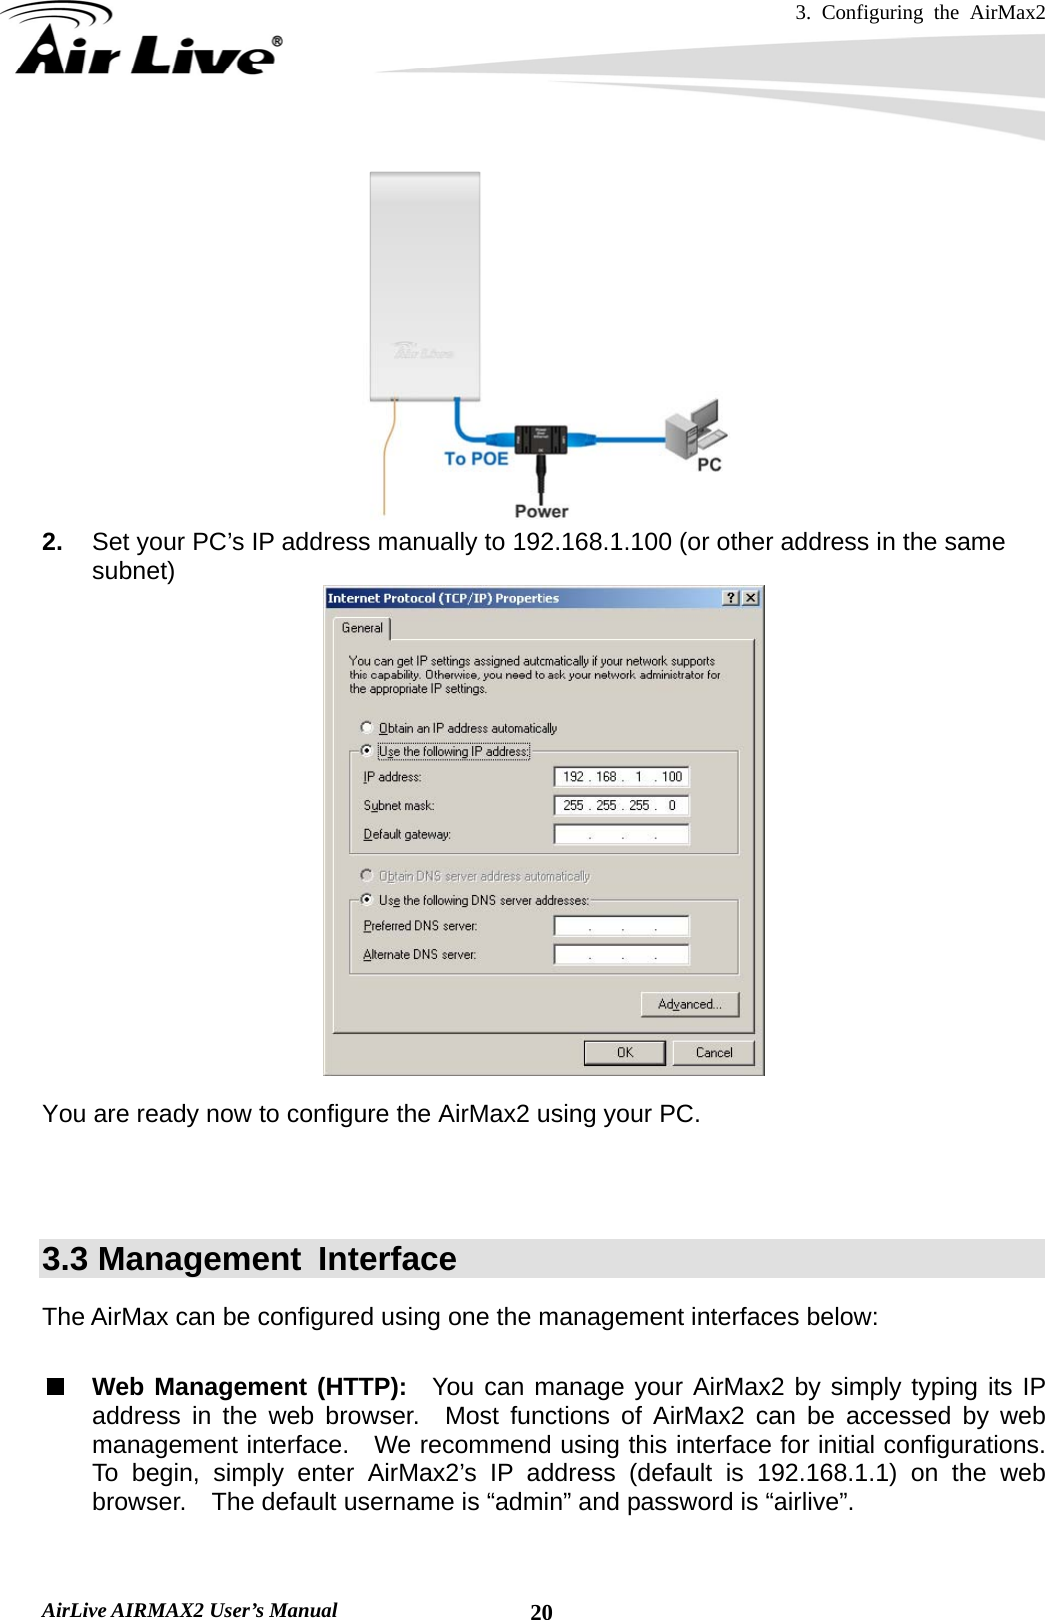 3. Configuring the AirMax2   AirLive AIRMAX2 User’s Manual  20 2.  Set your PC’s IP address manually to 192.168.1.100 (or other address in the same subnet)   You are ready now to configure the AirMax2 using your PC.        3.3 Management  Interface The AirMax can be configured using one the management interfaces below:  Web Management (HTTP):  You can manage your AirMax2 by simply typing its IP address in the web browser.  Most functions of AirMax2 can be accessed by web management interface.    We recommend using this interface for initial configurations.   To begin, simply enter AirMax2’s IP address (default is 192.168.1.1) on the web browser.  The default username is “admin” and password is “airlive”.  